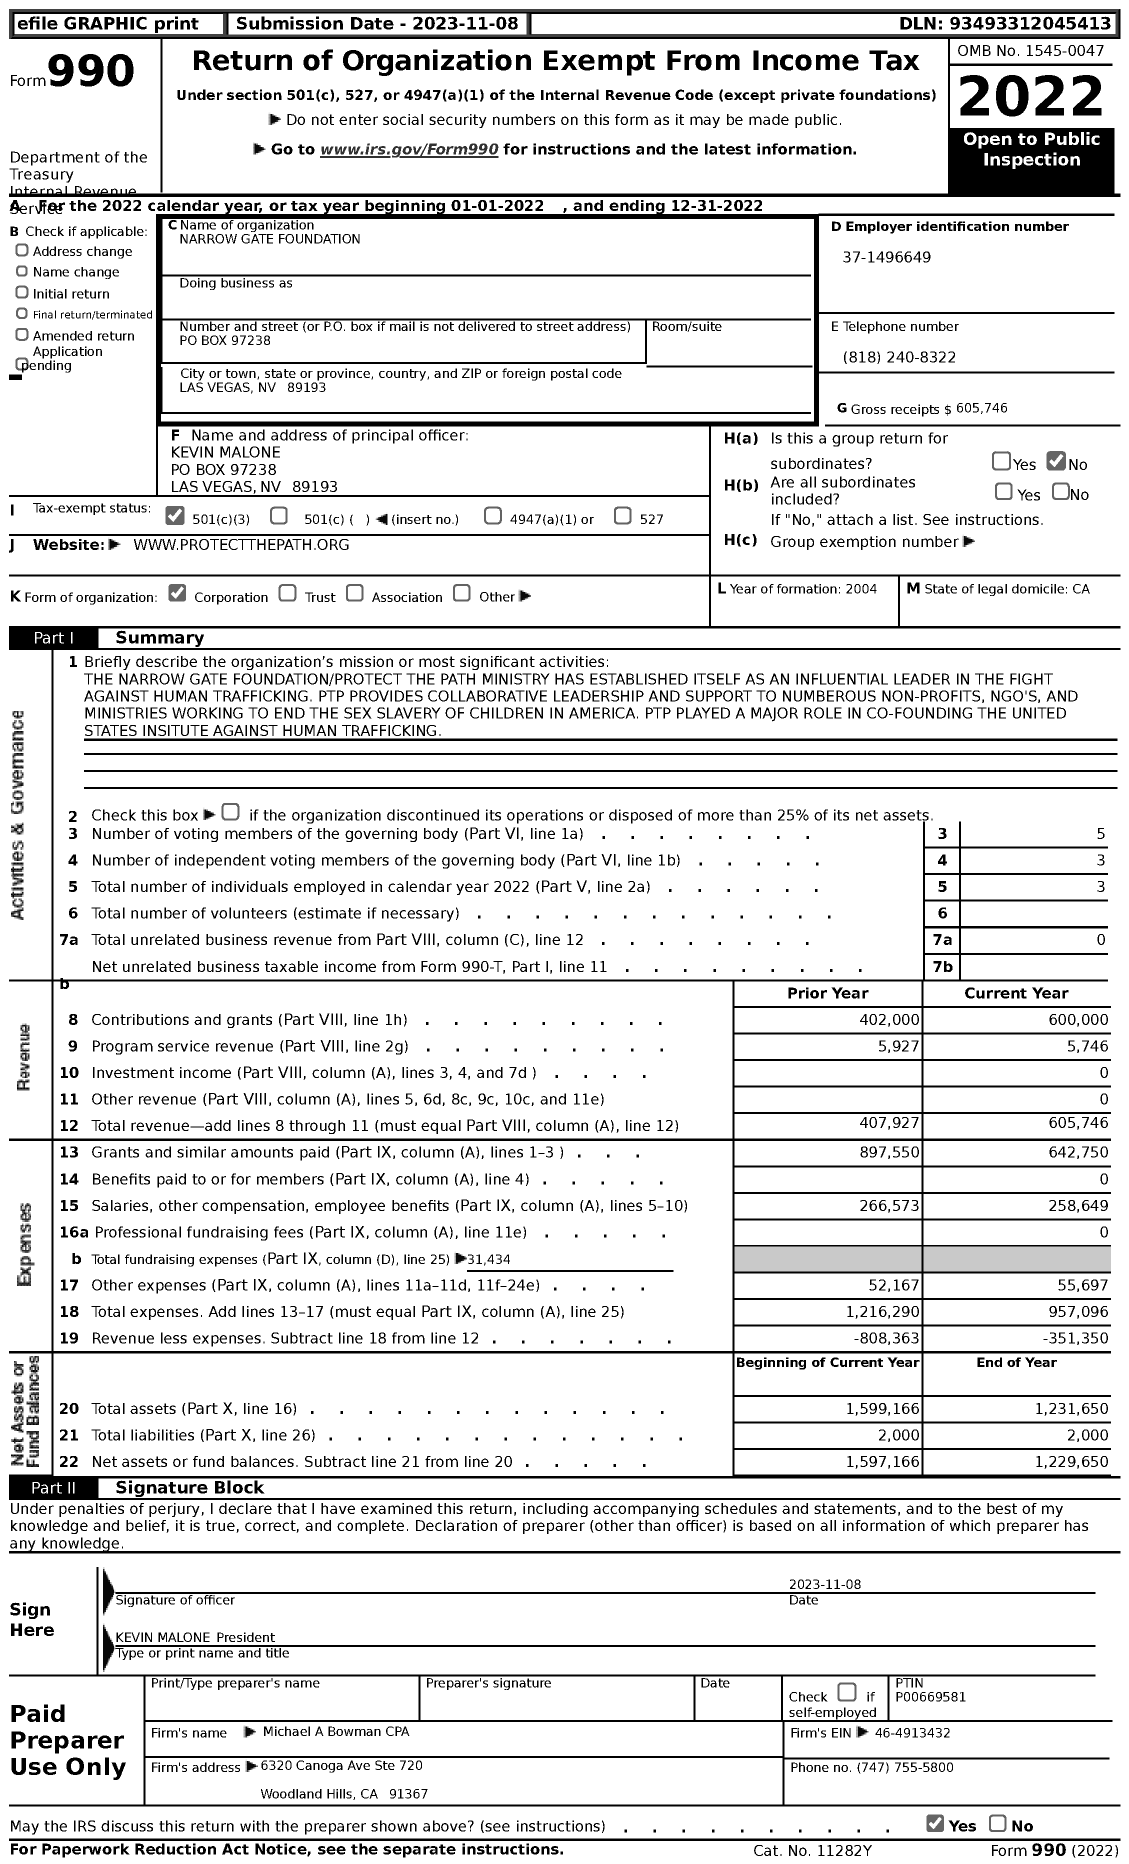 Image of first page of 2022 Form 990 for Narrow Gate Foundation / Protect the Path